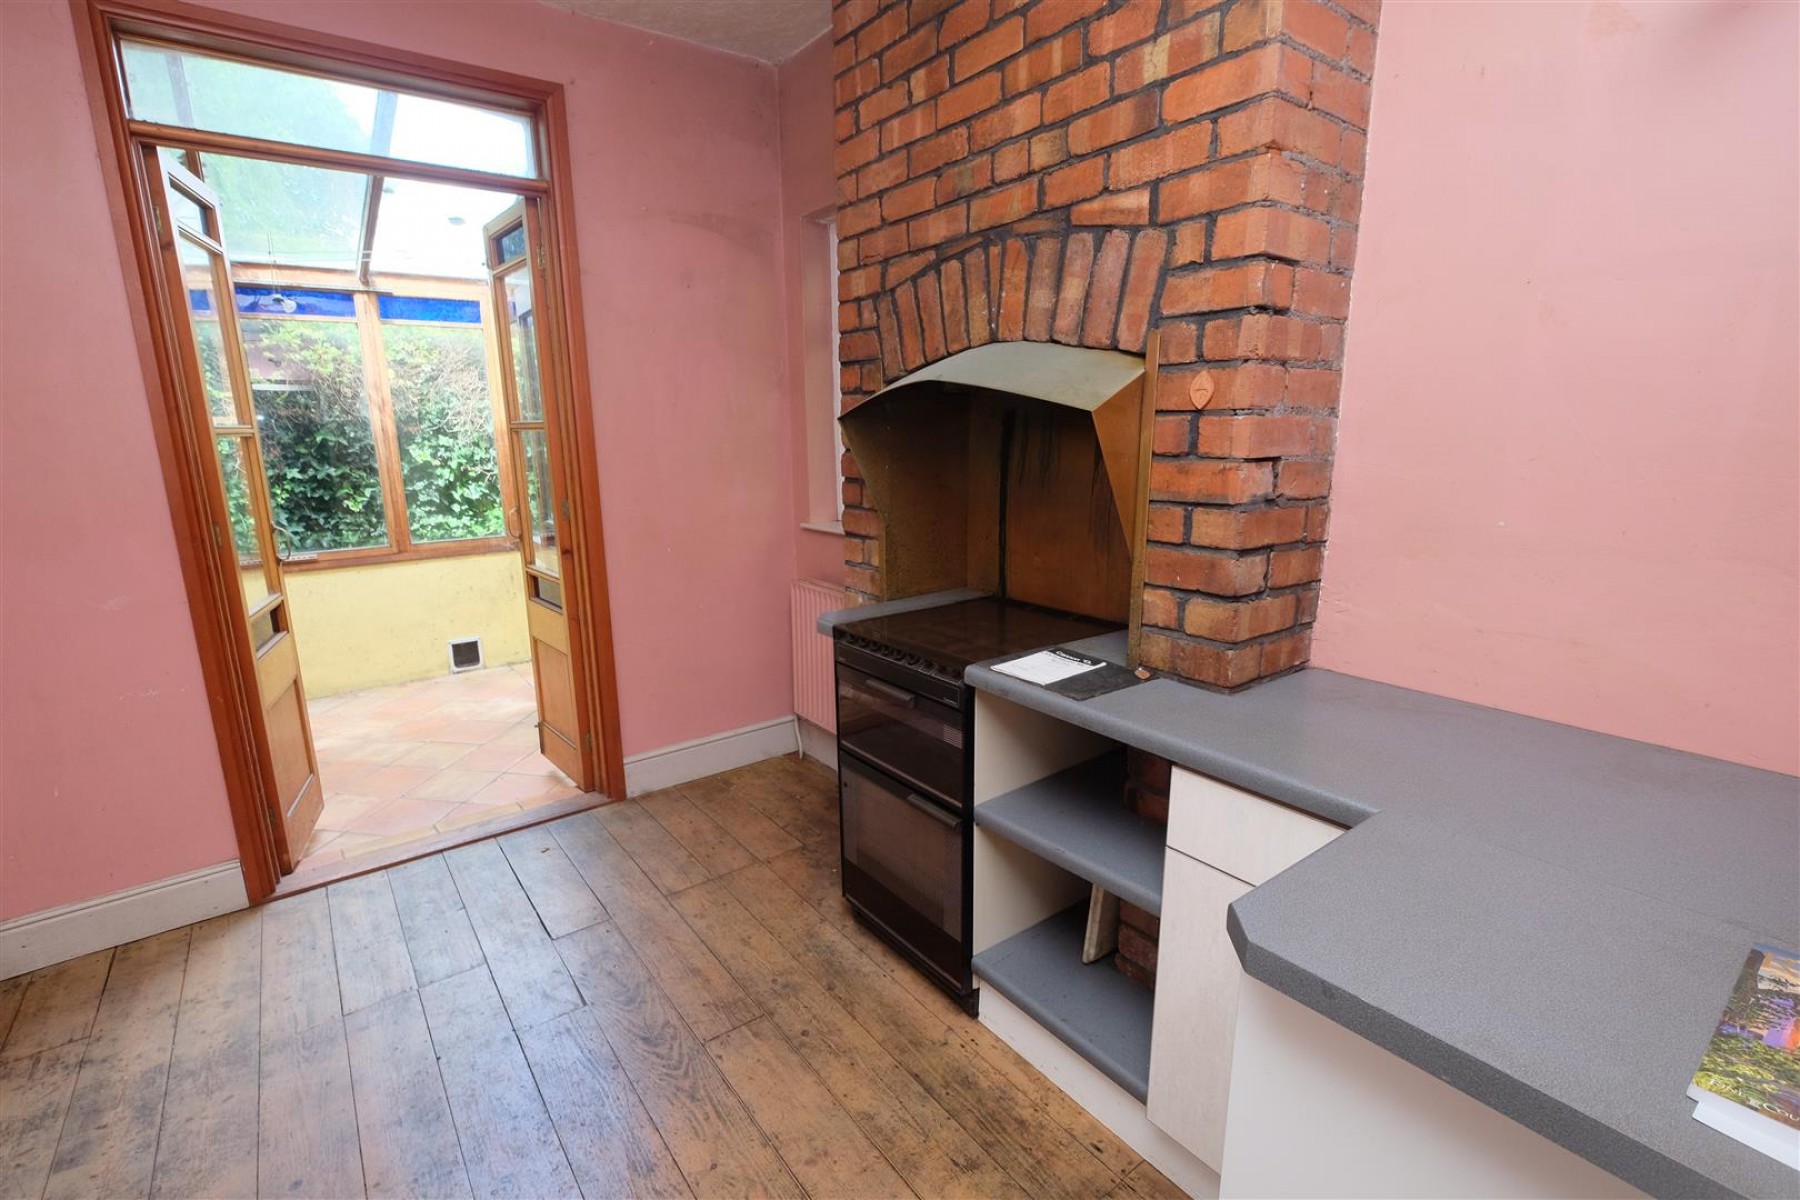 Images for HOUSE FOR UPDATING | BISHOPSTON